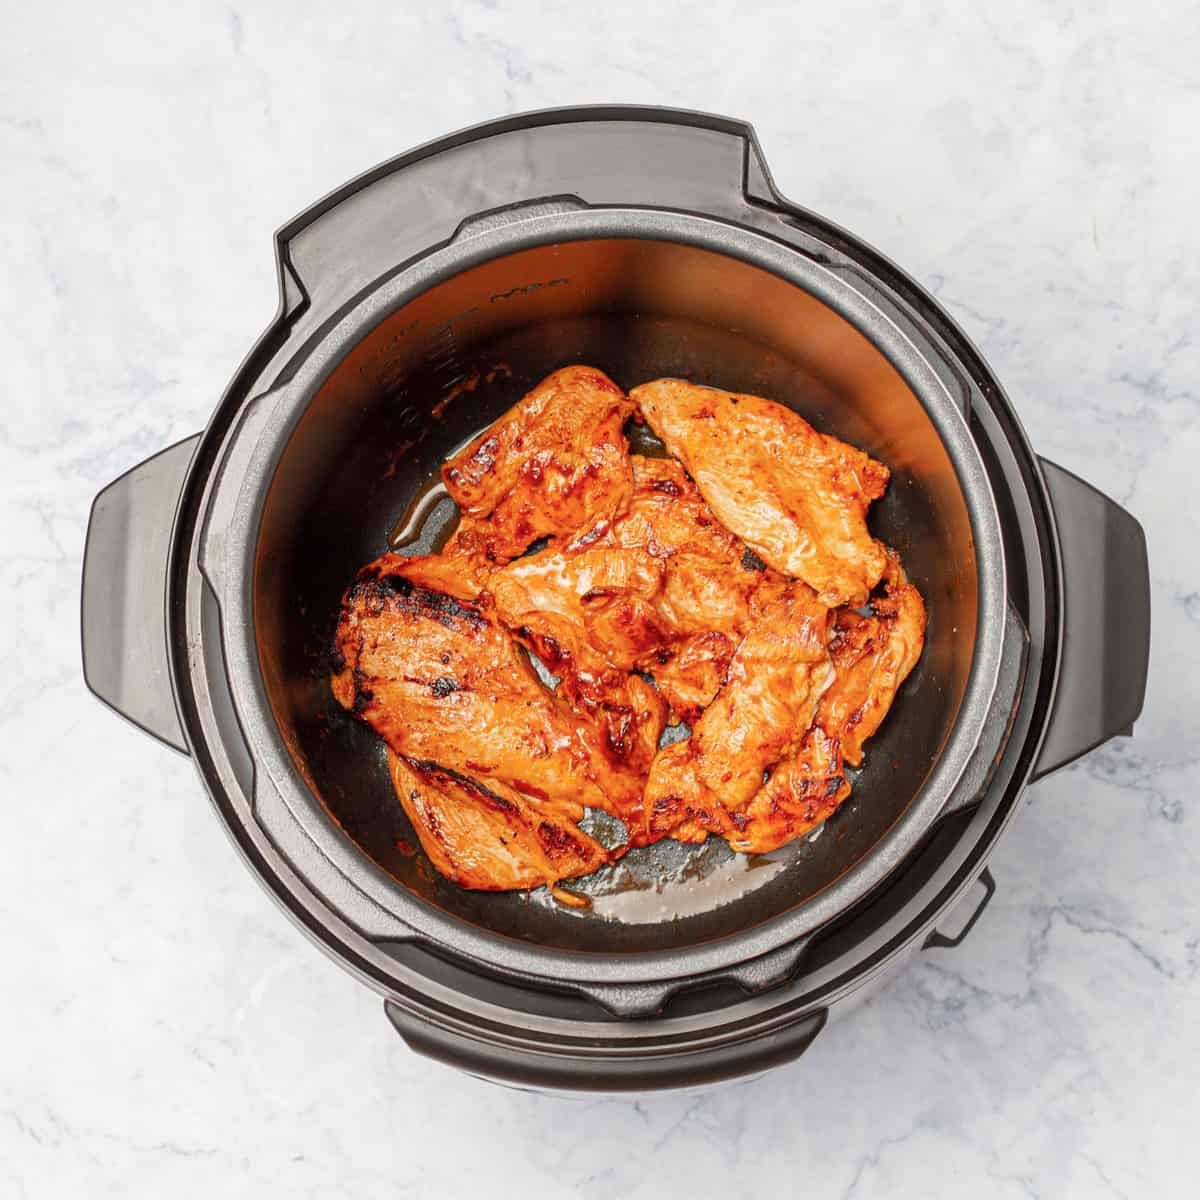 marinated chicken breast fillets in instant pot